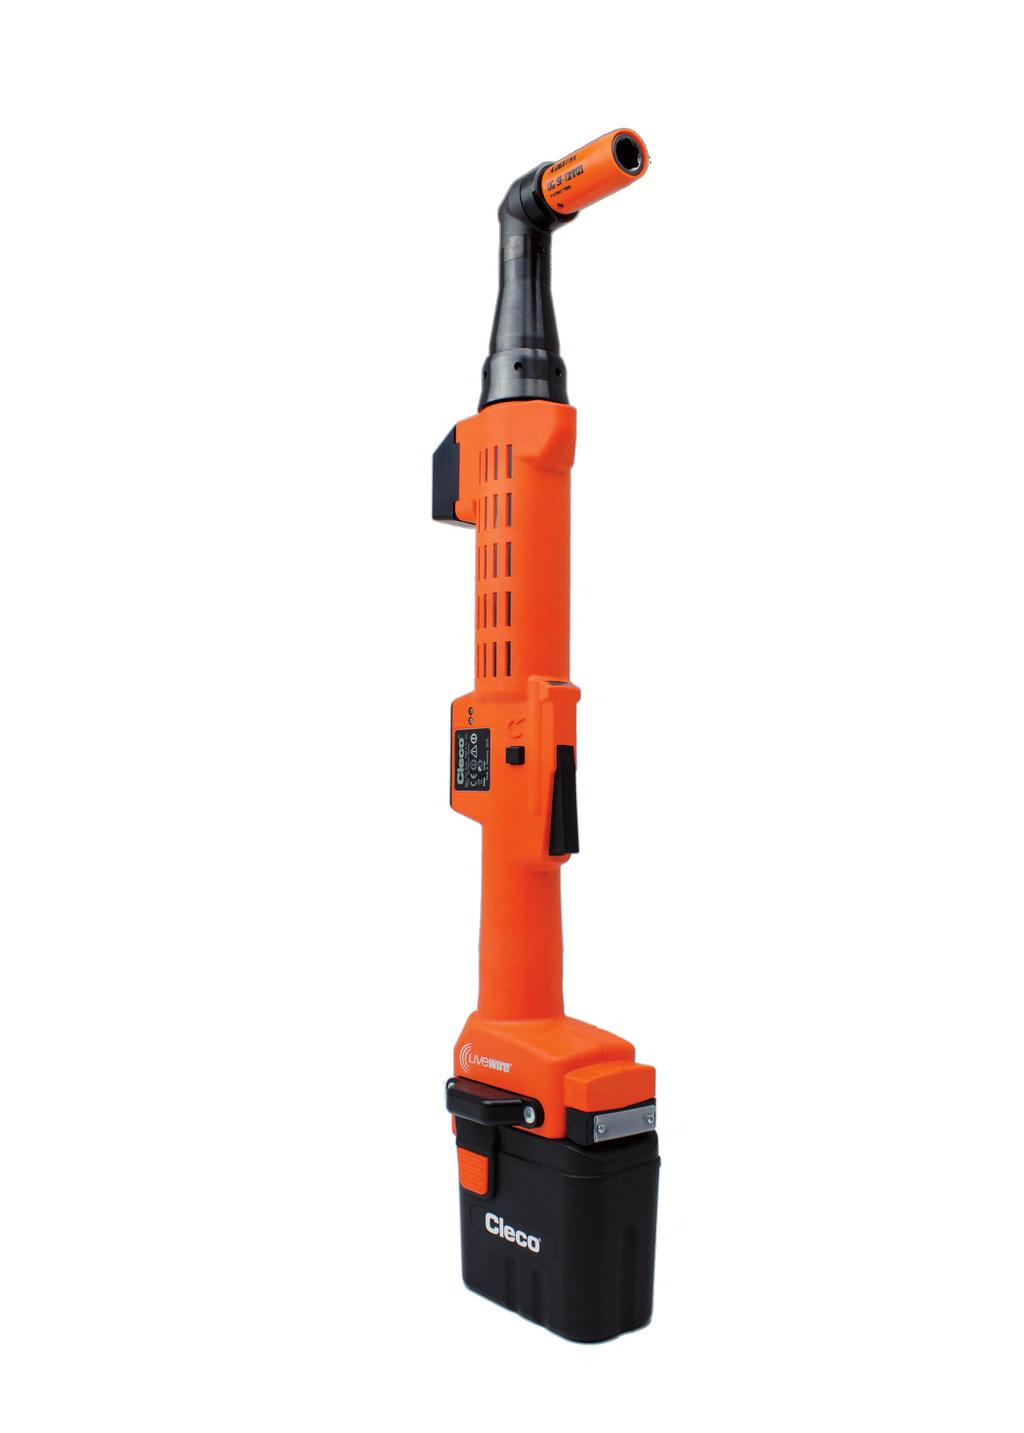 The New LiveWire 2 Cordless Tools From Cleco Light, Intelligent. All The Power.